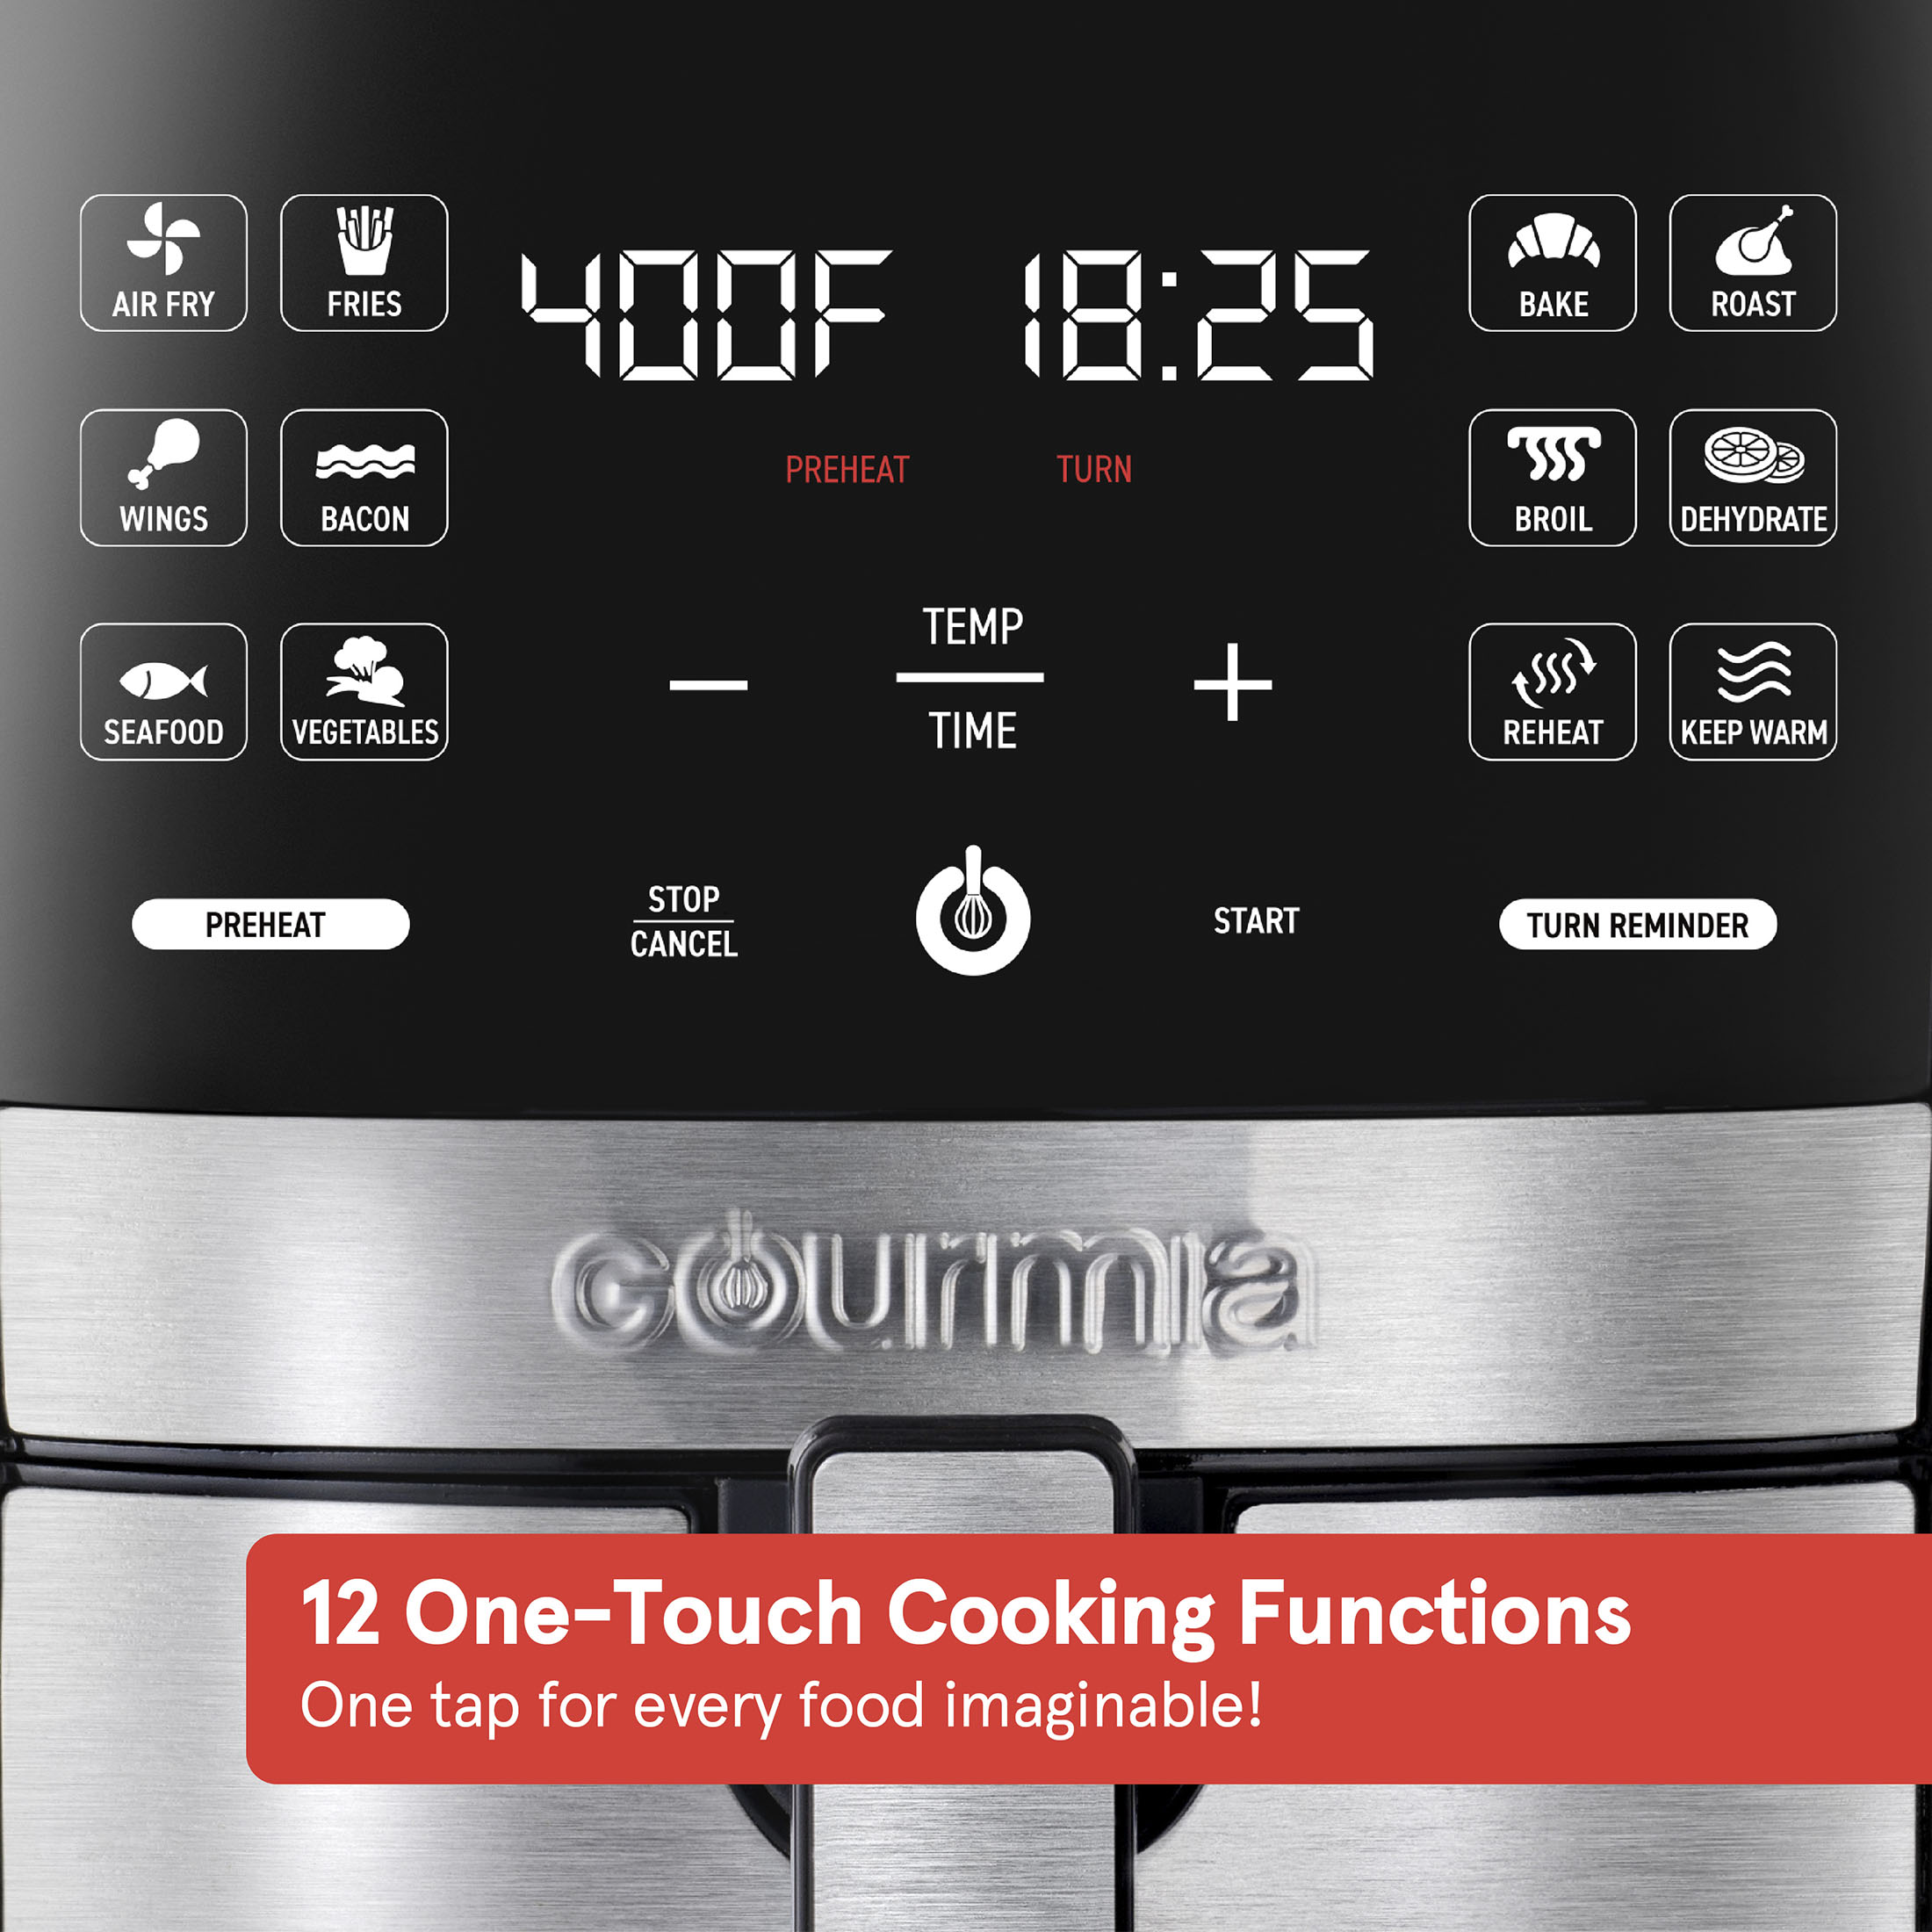 Gourmia 6 Qt Digital Air Fryer with Guided Cooking and 12 One-Touch Cooking Functions, 13.58 H, New - image 5 of 9